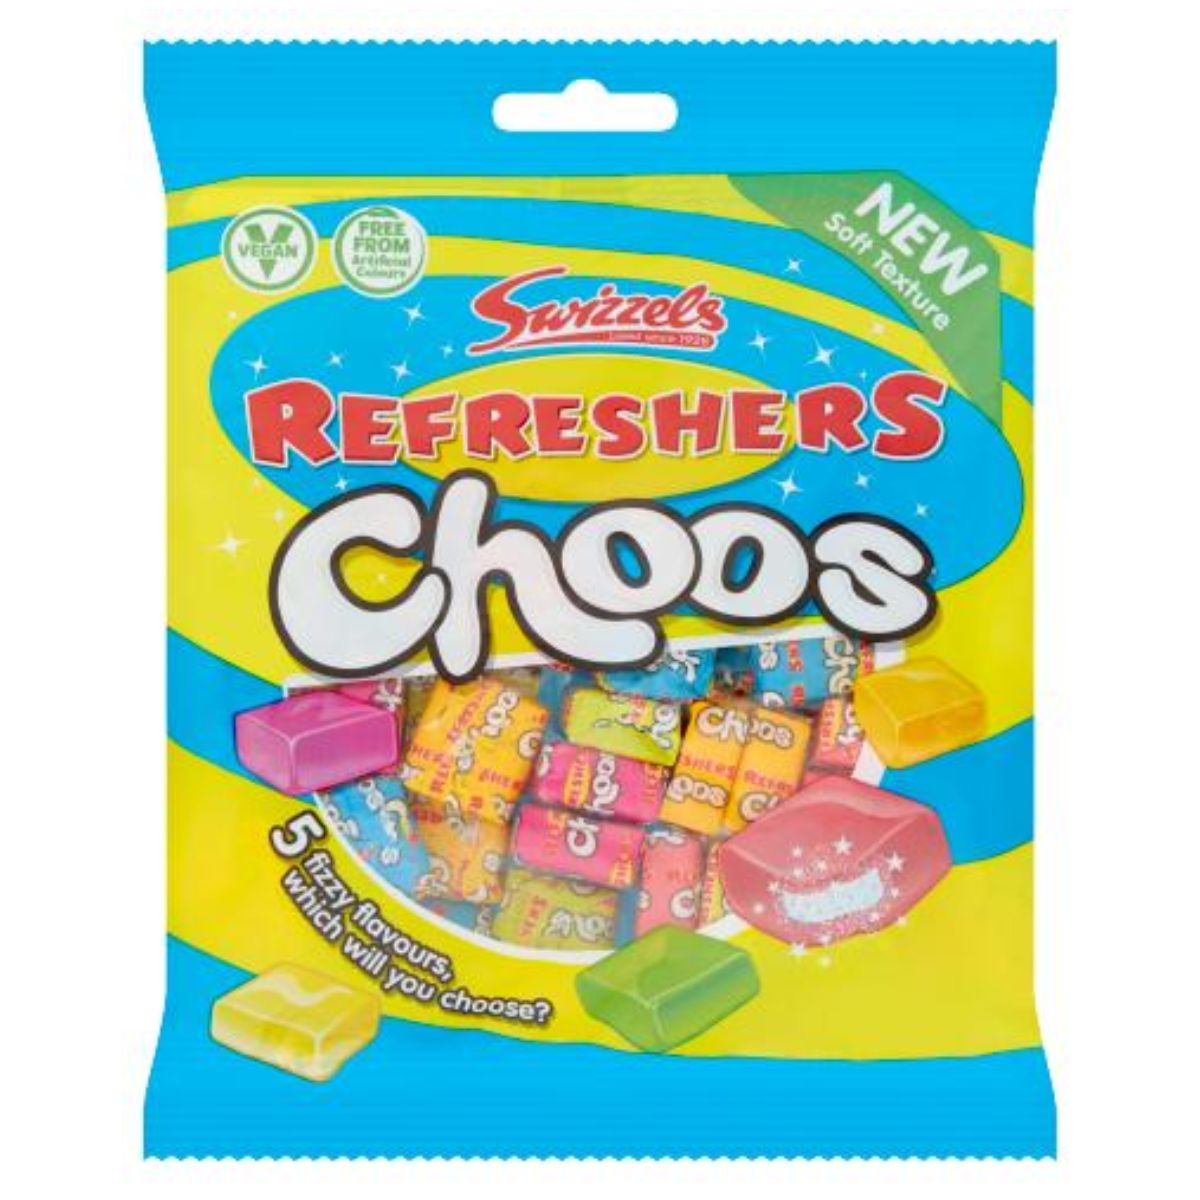 A pack of Swizzels - Refreshers Choos candy, featuring assorted flavors displayed in brightly colored wrappers.